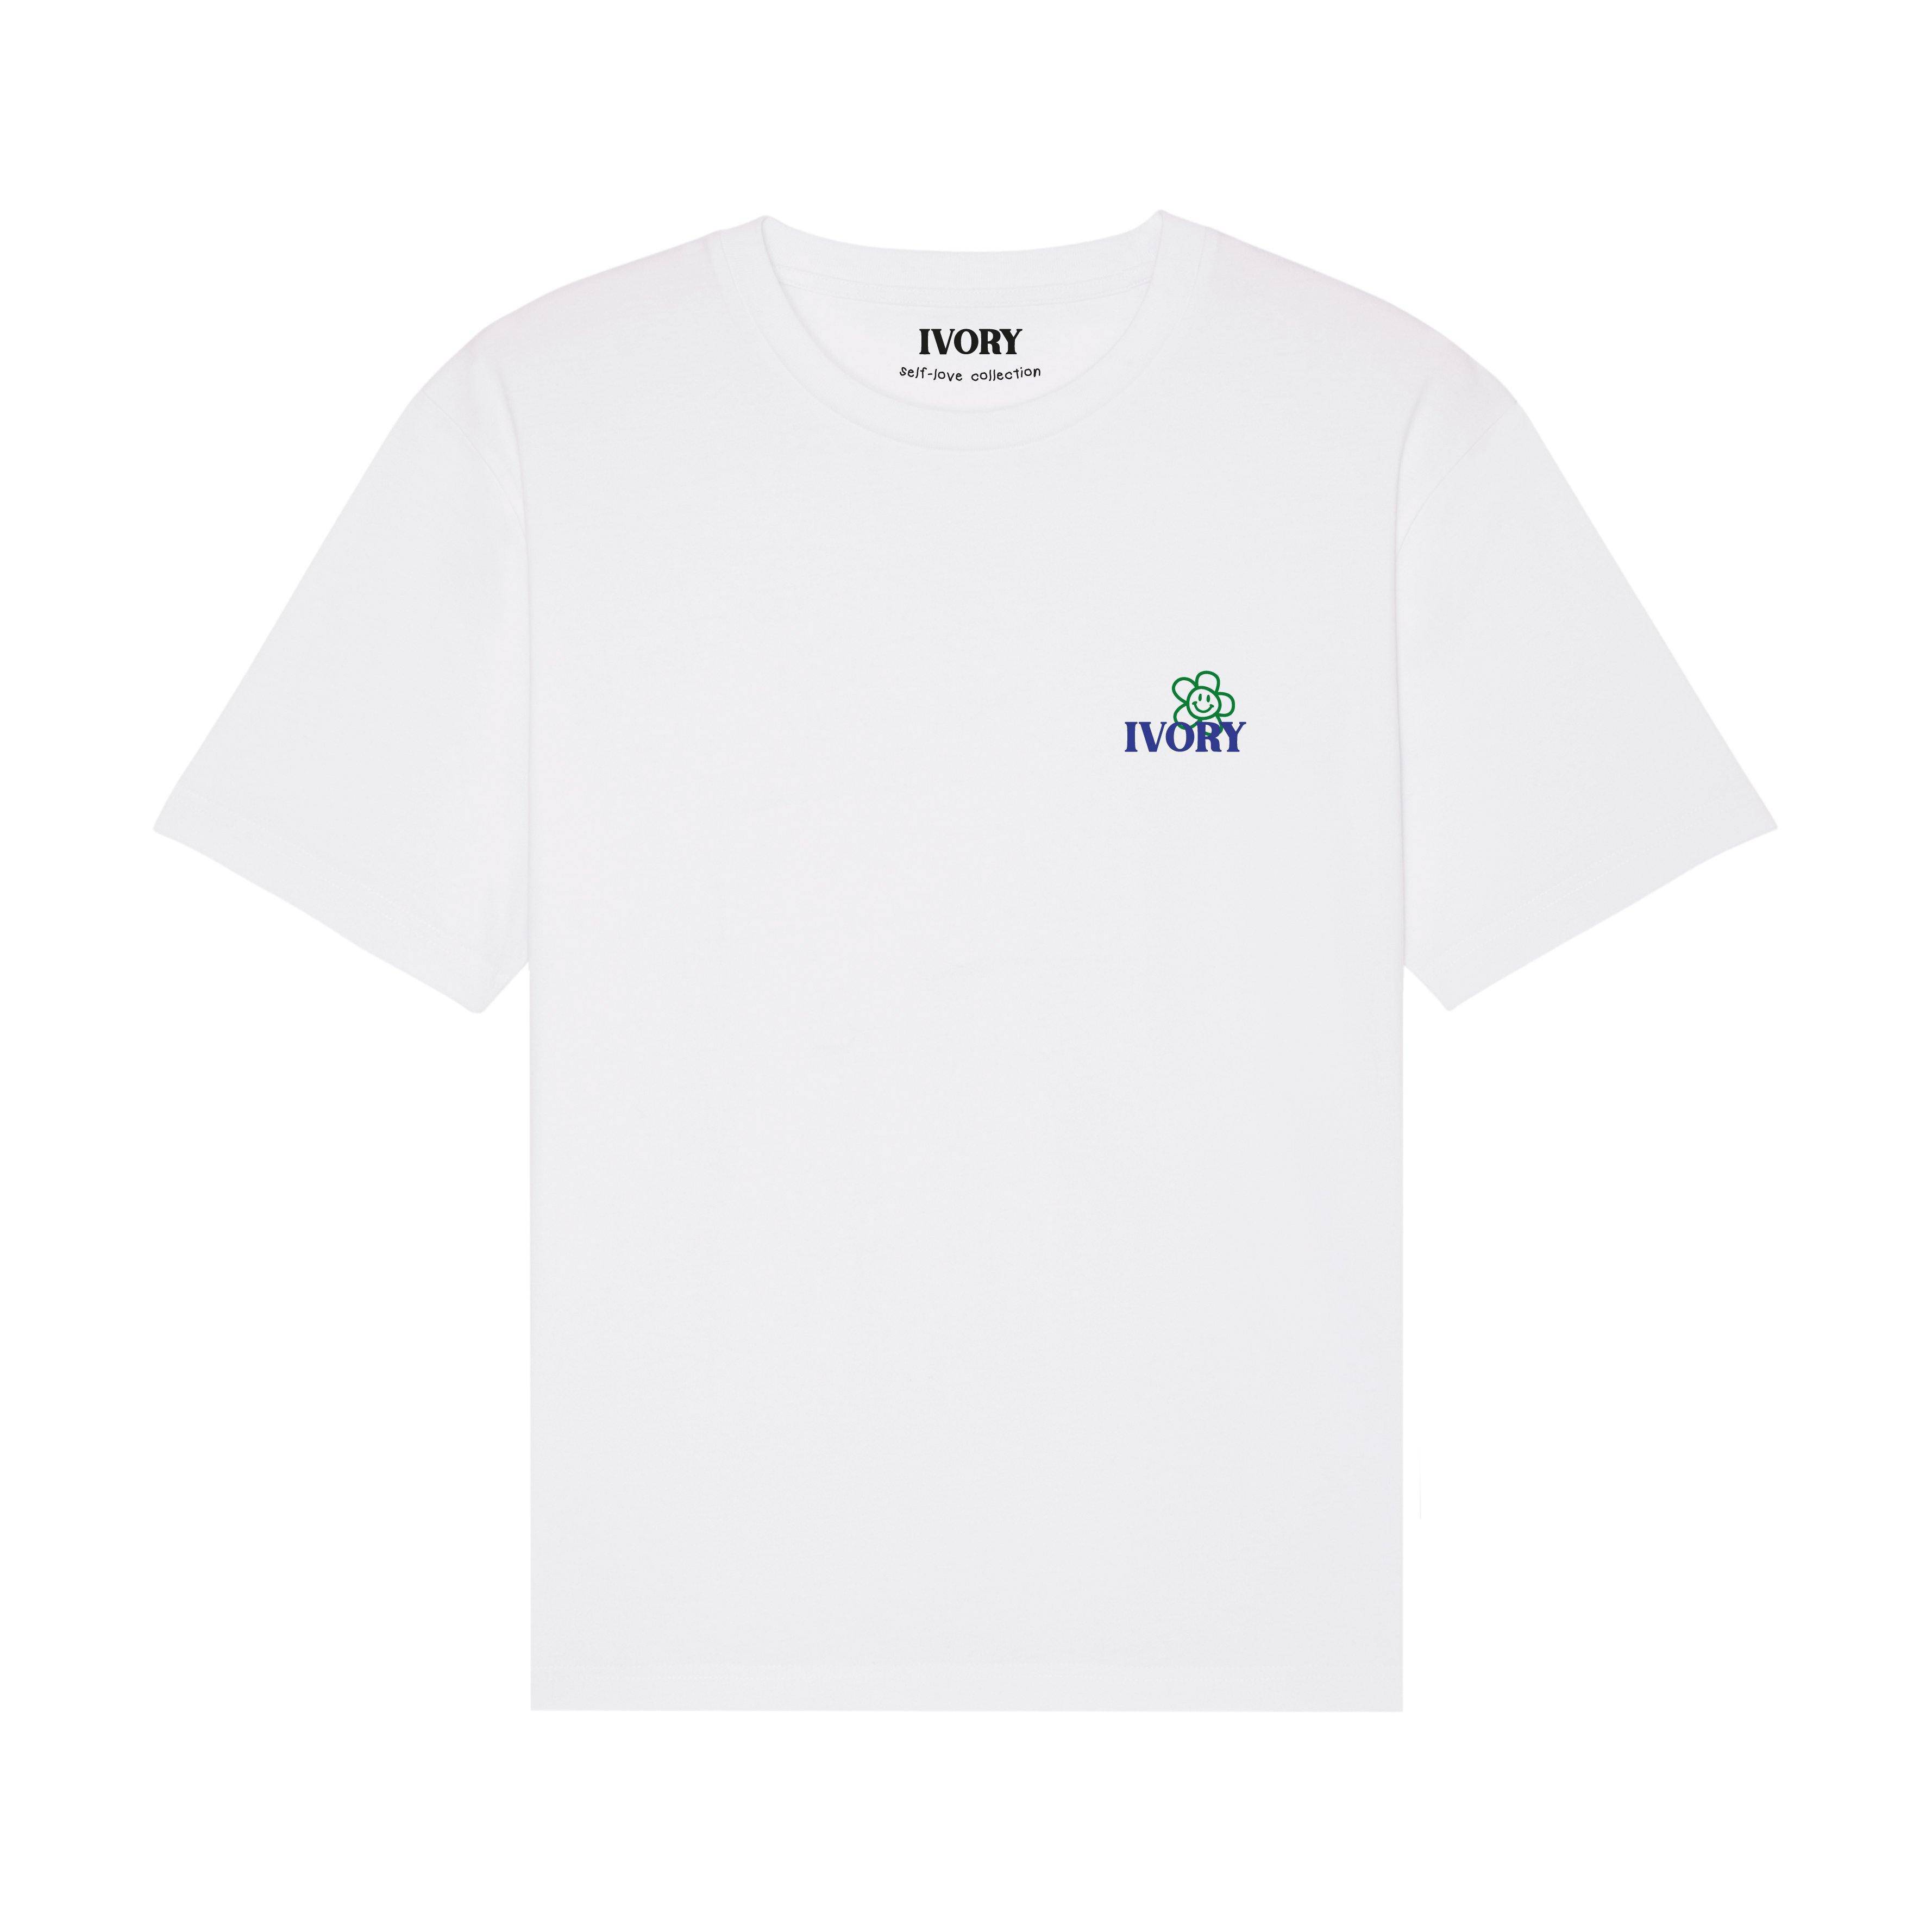 GROWING DAY BY DAY TEE WHITE - IVORY WORLD